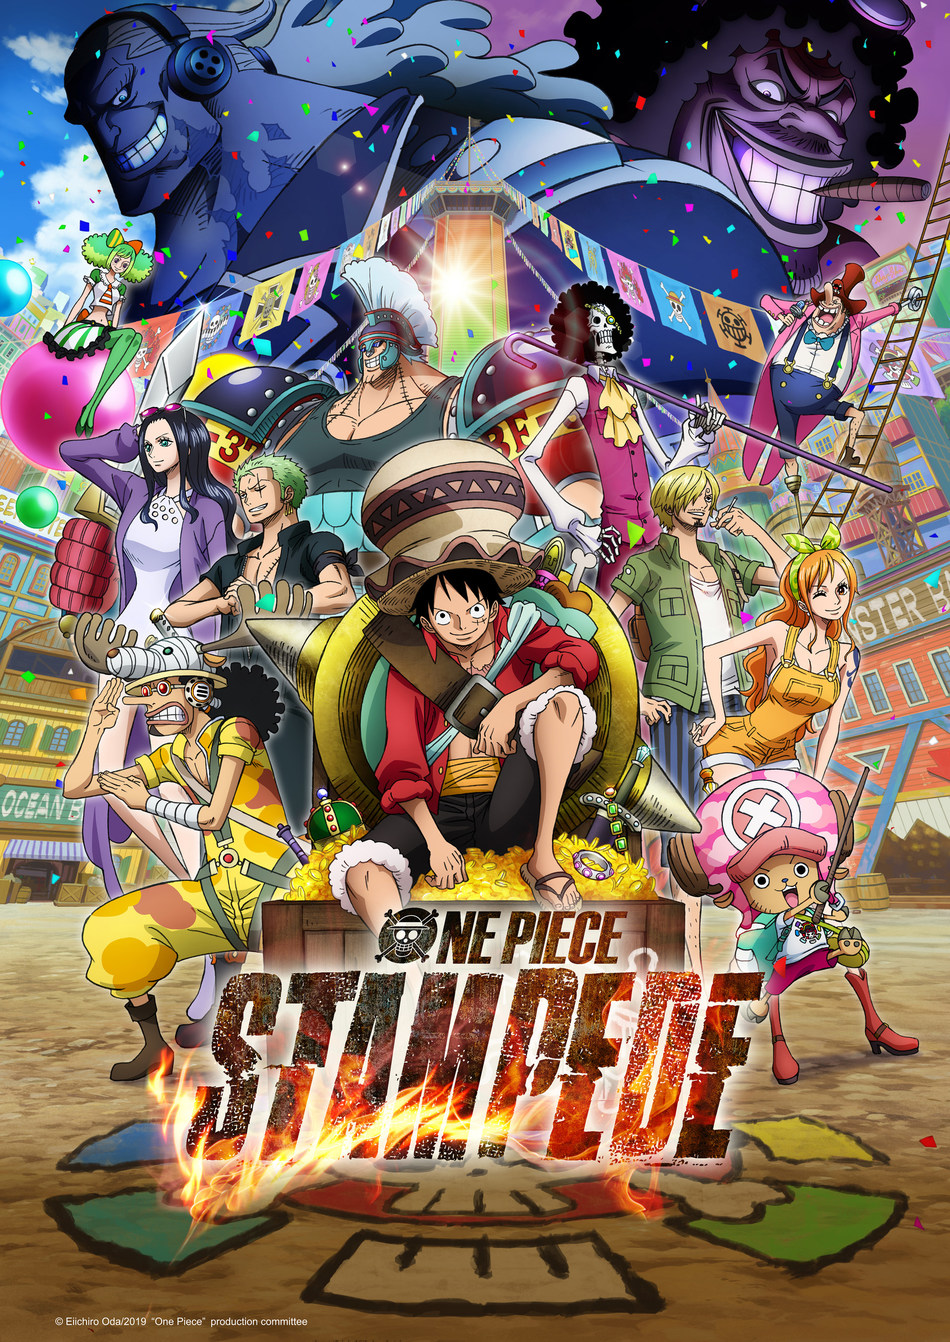 th Anniversary Feature Film One Piece Stampede Gallops Into North American Theaters This Fall